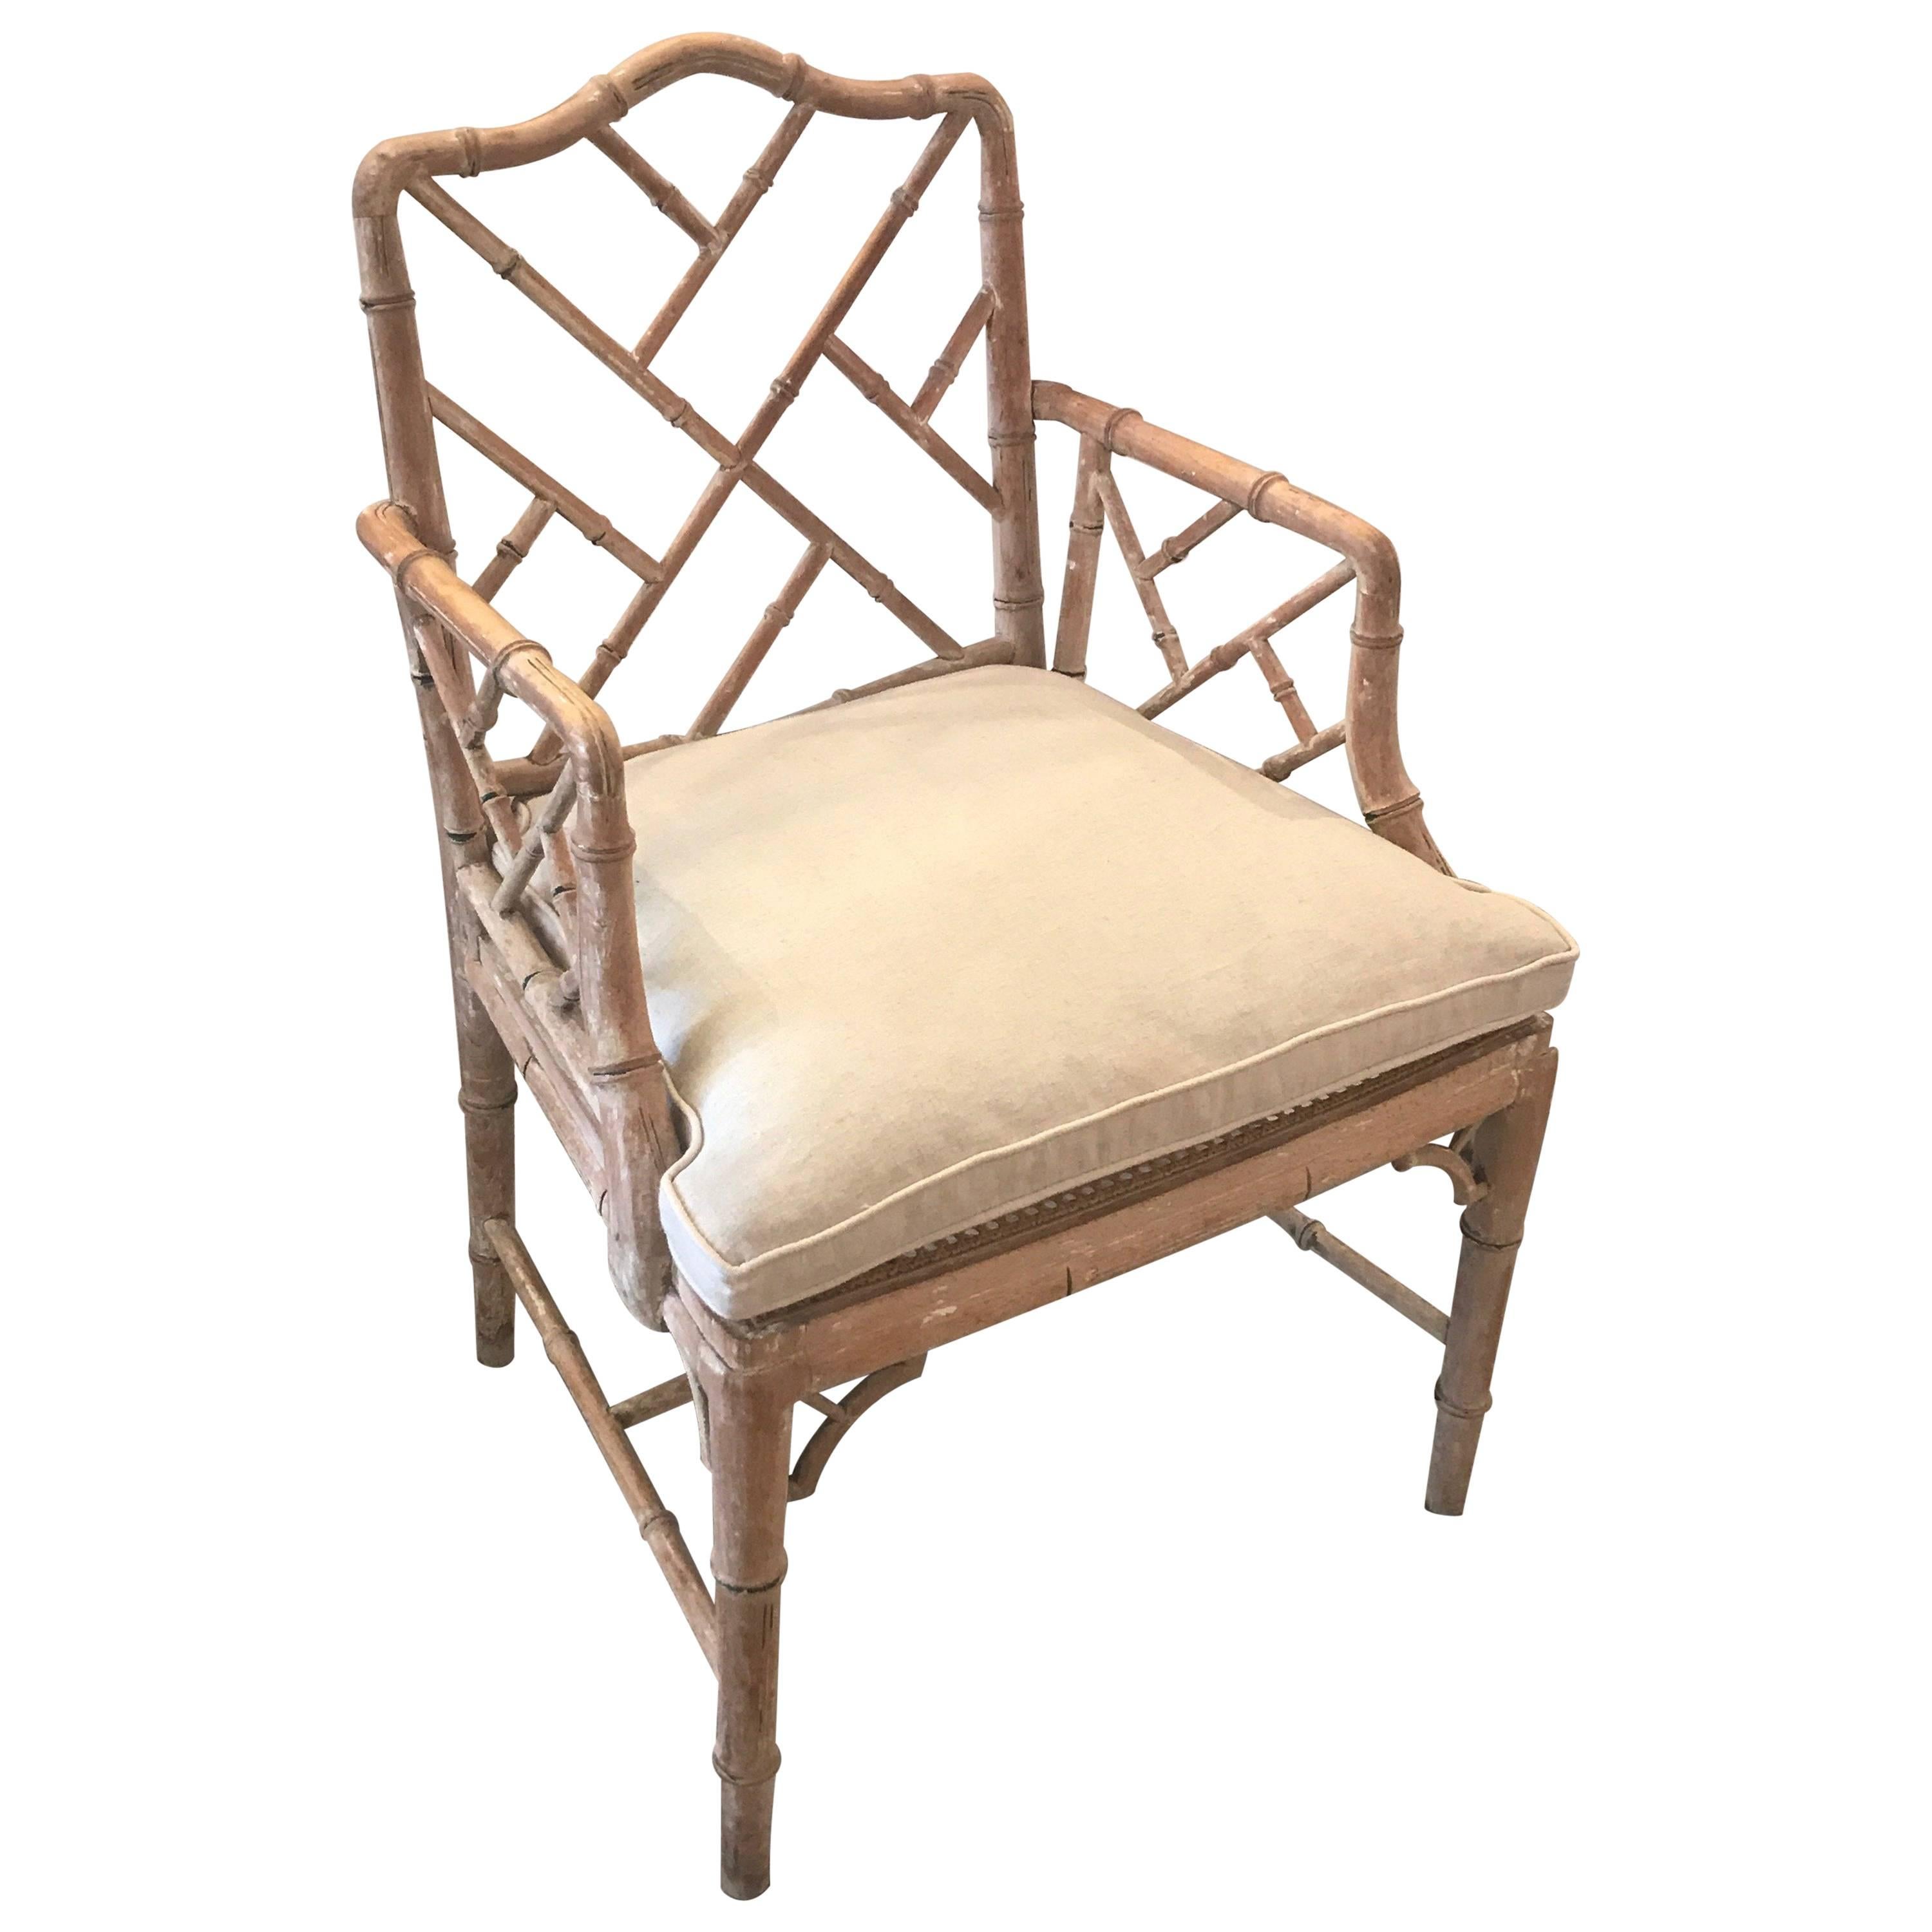 Pair of Hand-Carved Bamboo Motif Side Chairs with Linen Cushions